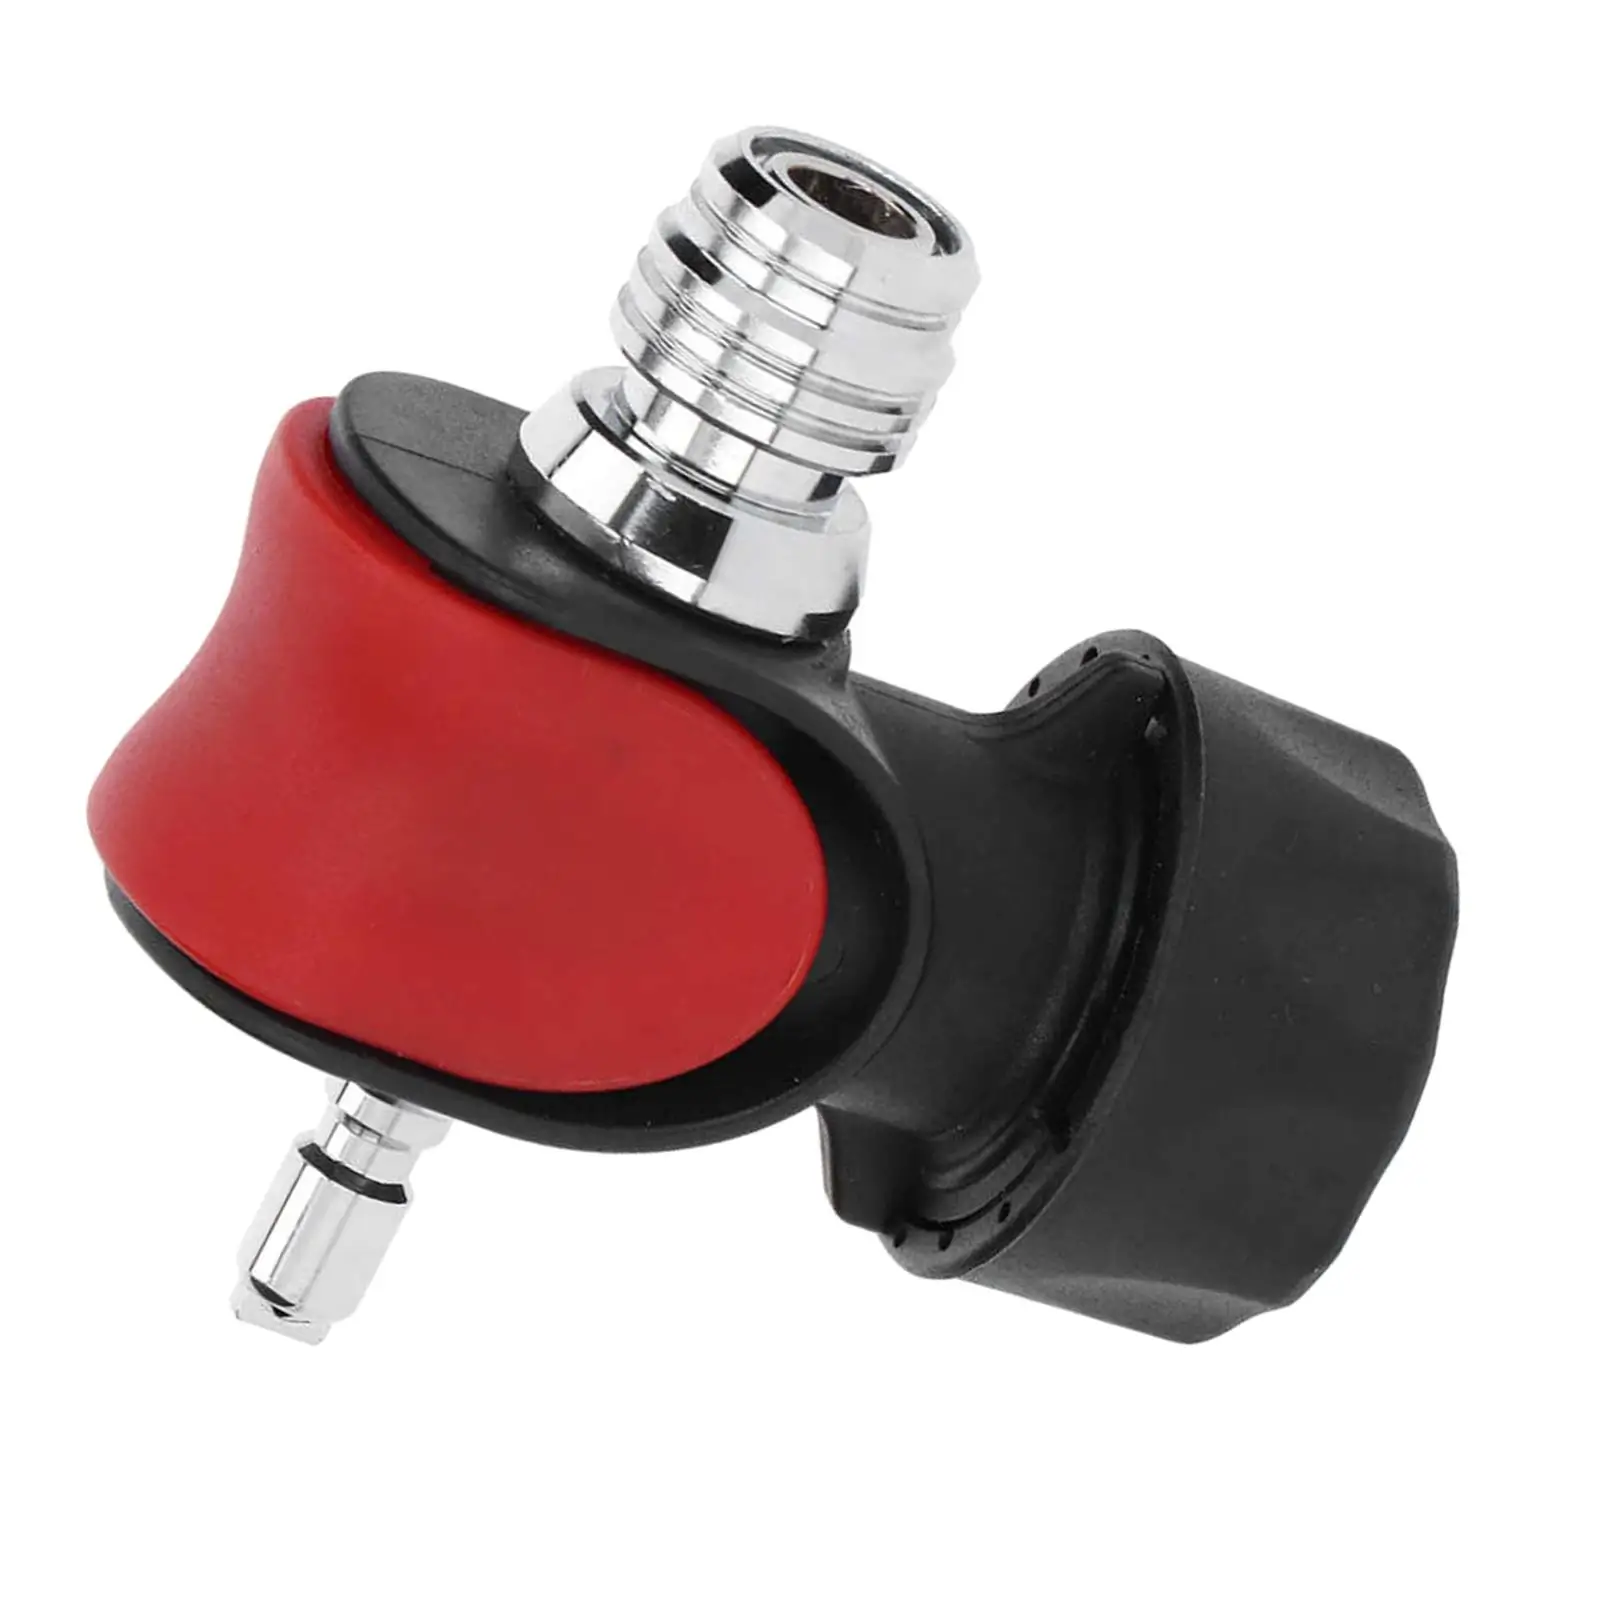 Scuba Diving Signal Shaker Signal Bell Durable Shaker Stainless Steel Lightweight Portable Electric Buzzer Underwater Sounder